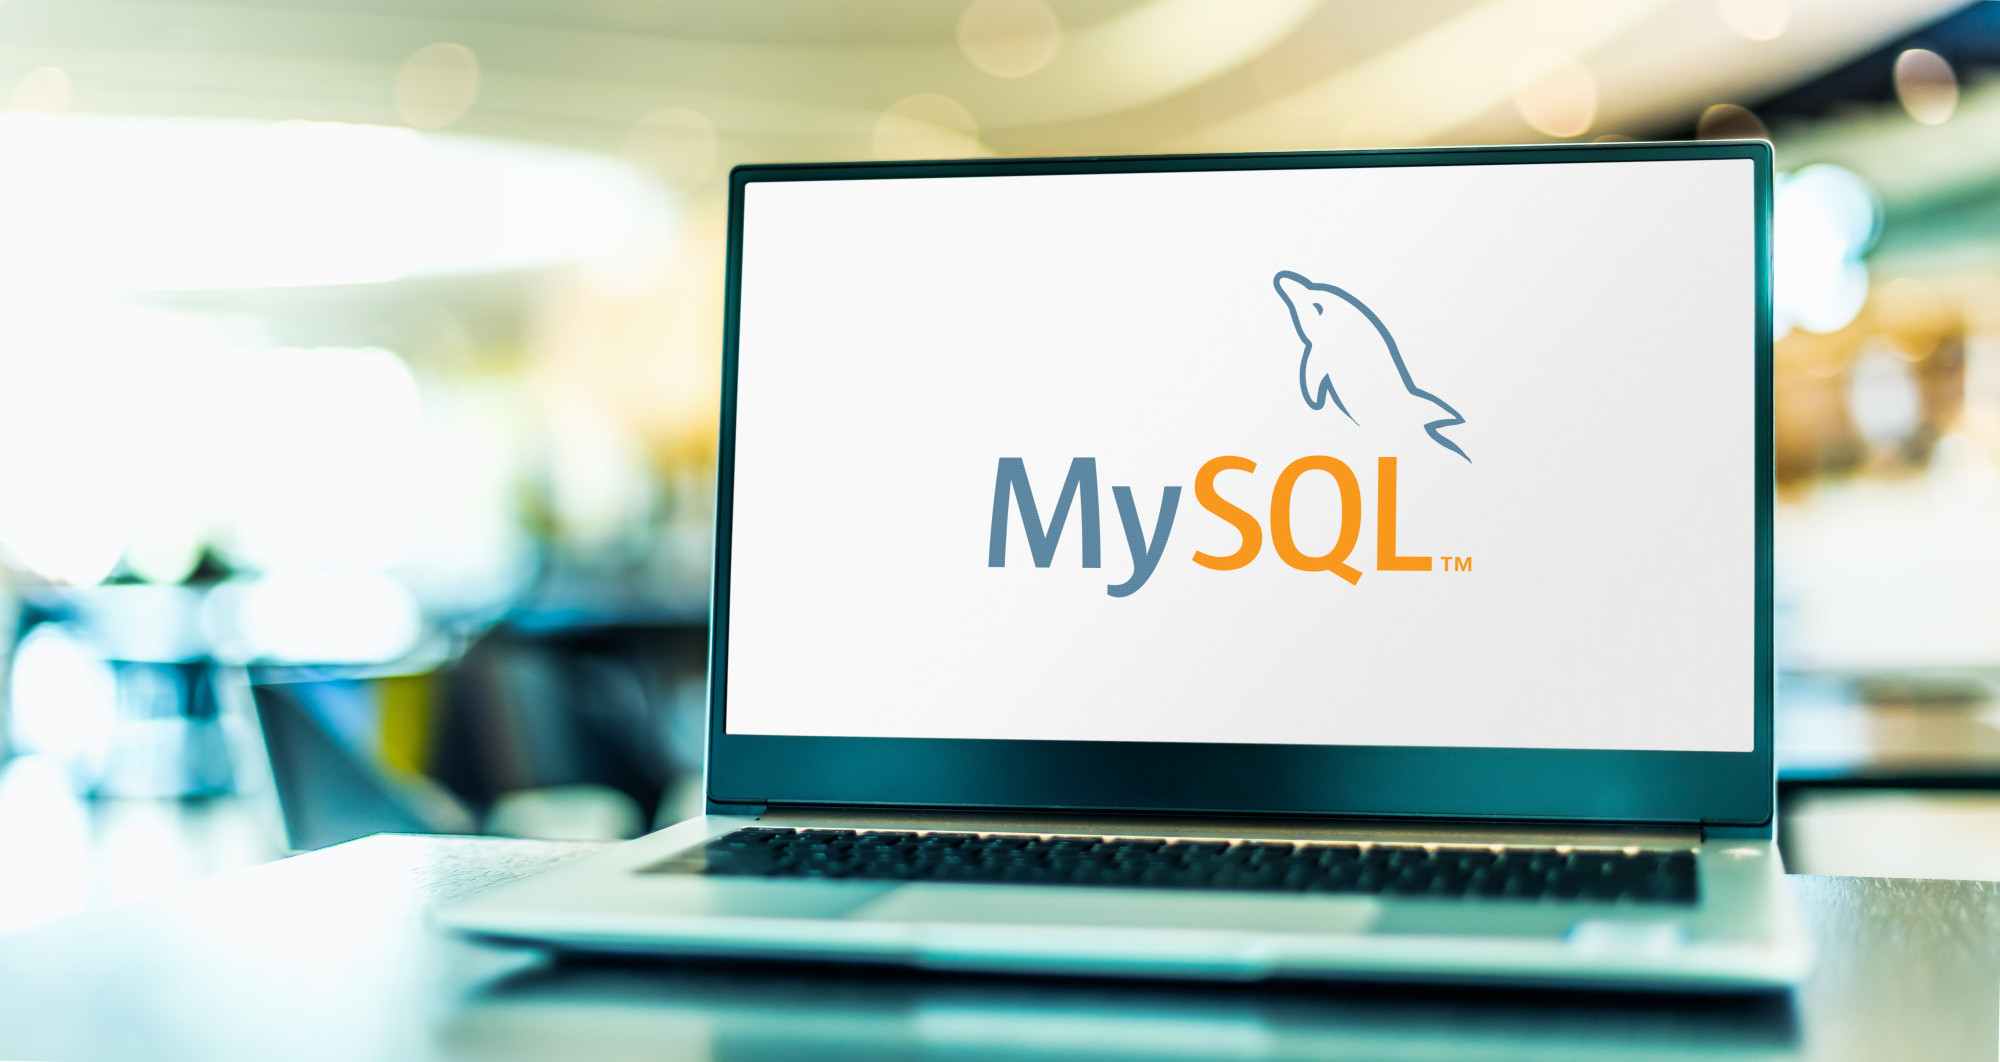 US tech giant Oracle Corp, which owns open-source relational database management system MySQL, has not made any plans to suspend use of its product’s code by Chinese developers. Photo: Shutterstock